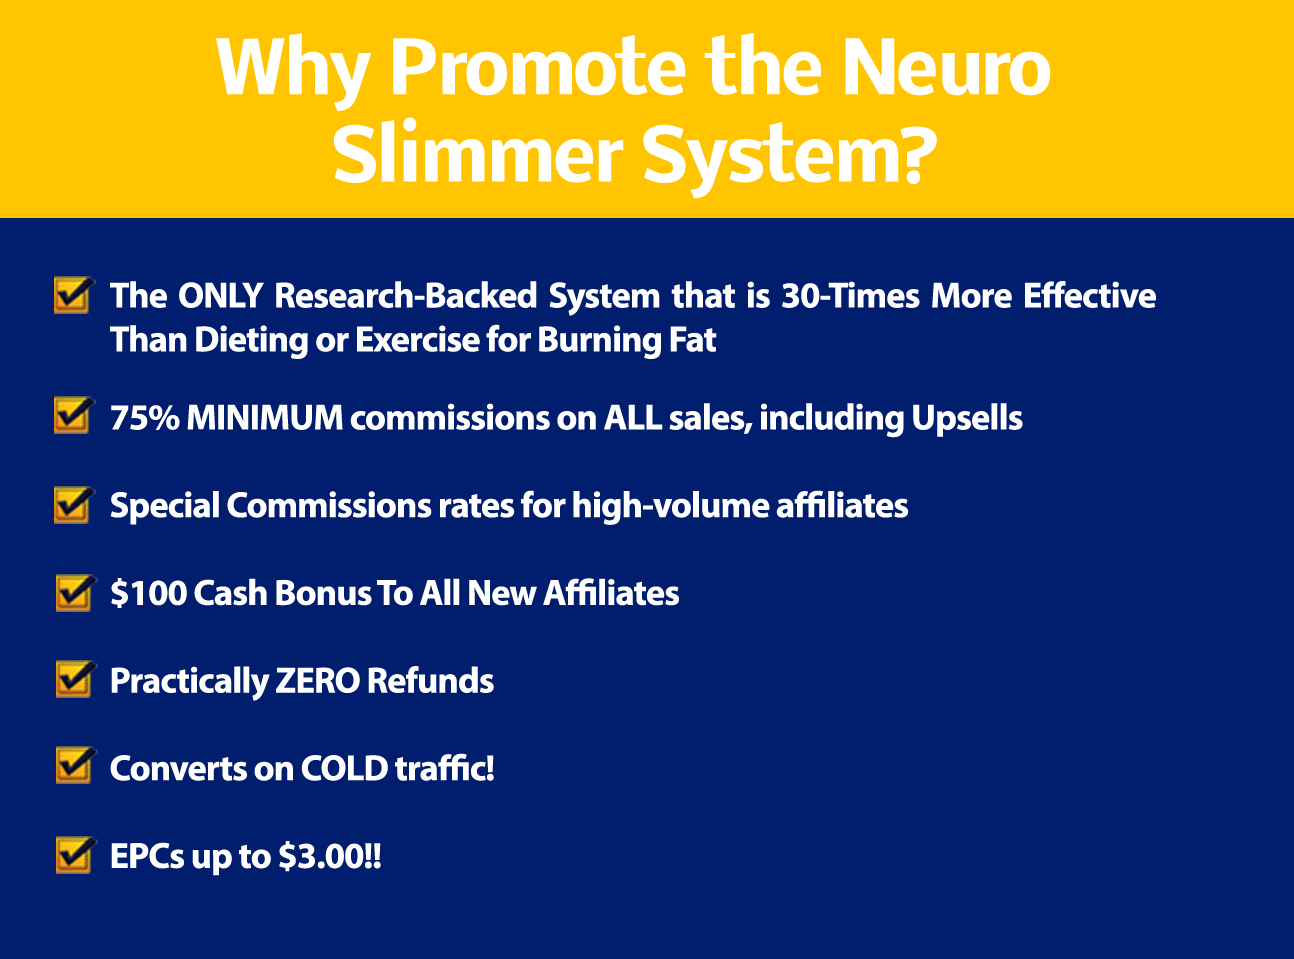 The Neuro-Slimmer System™